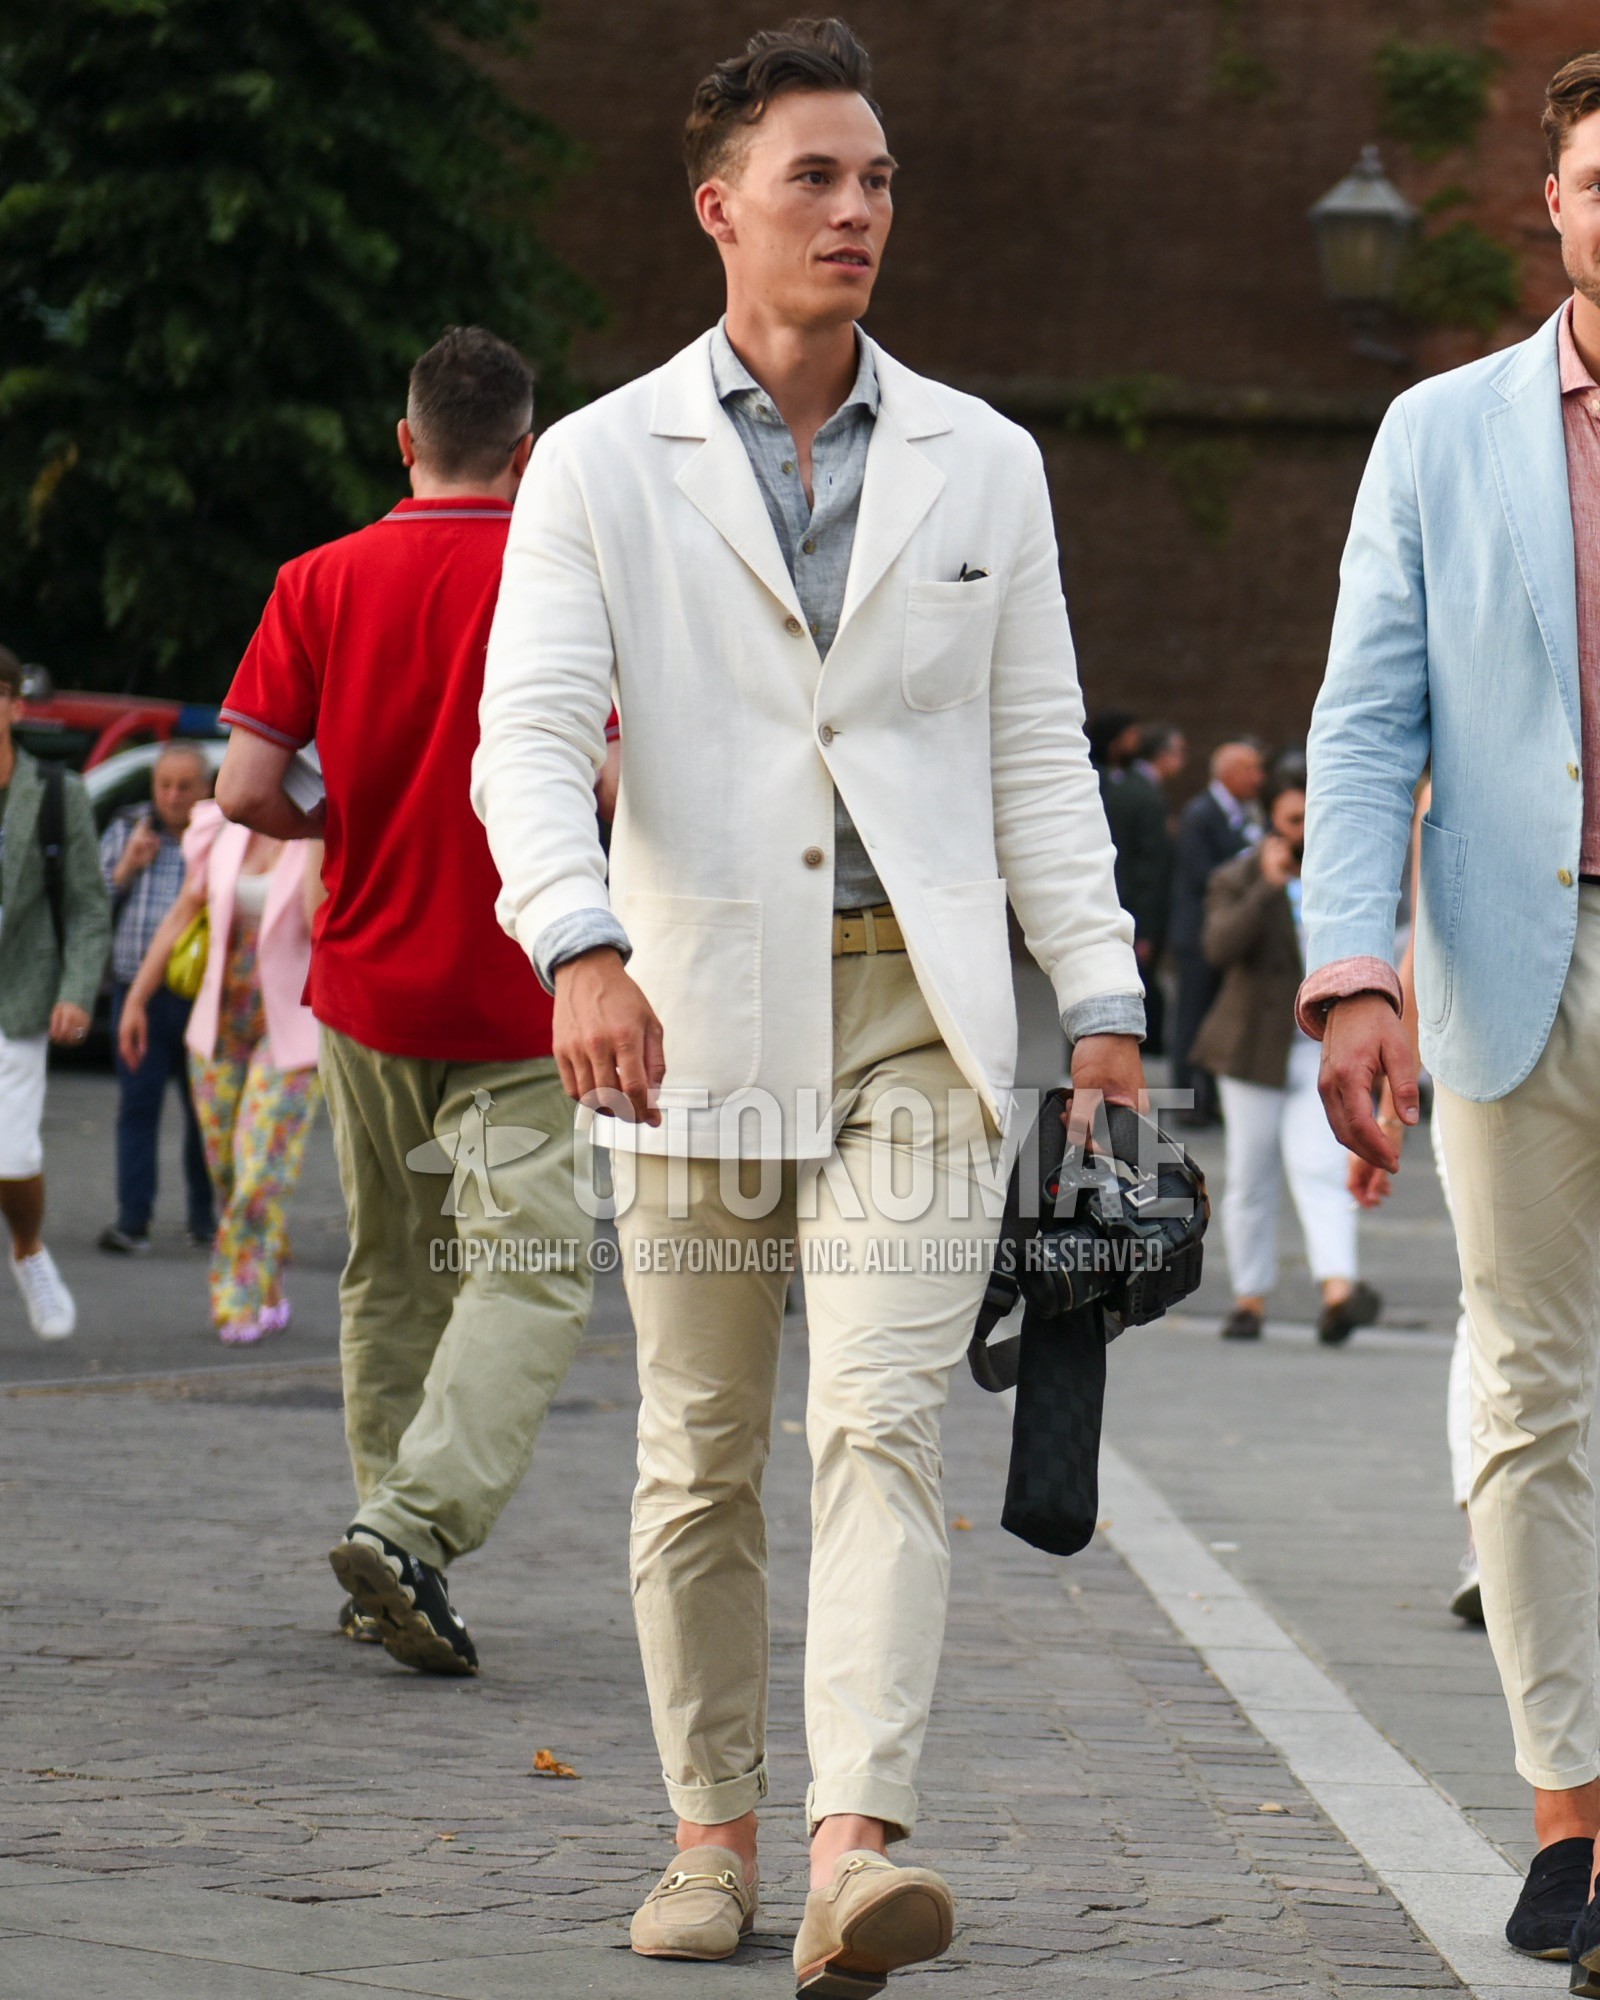 Men's spring summer outfit with white plain tailored jacket, gray plain shirt, beige plain leather belt, beige plain chinos, beige bit loafers leather shoes.